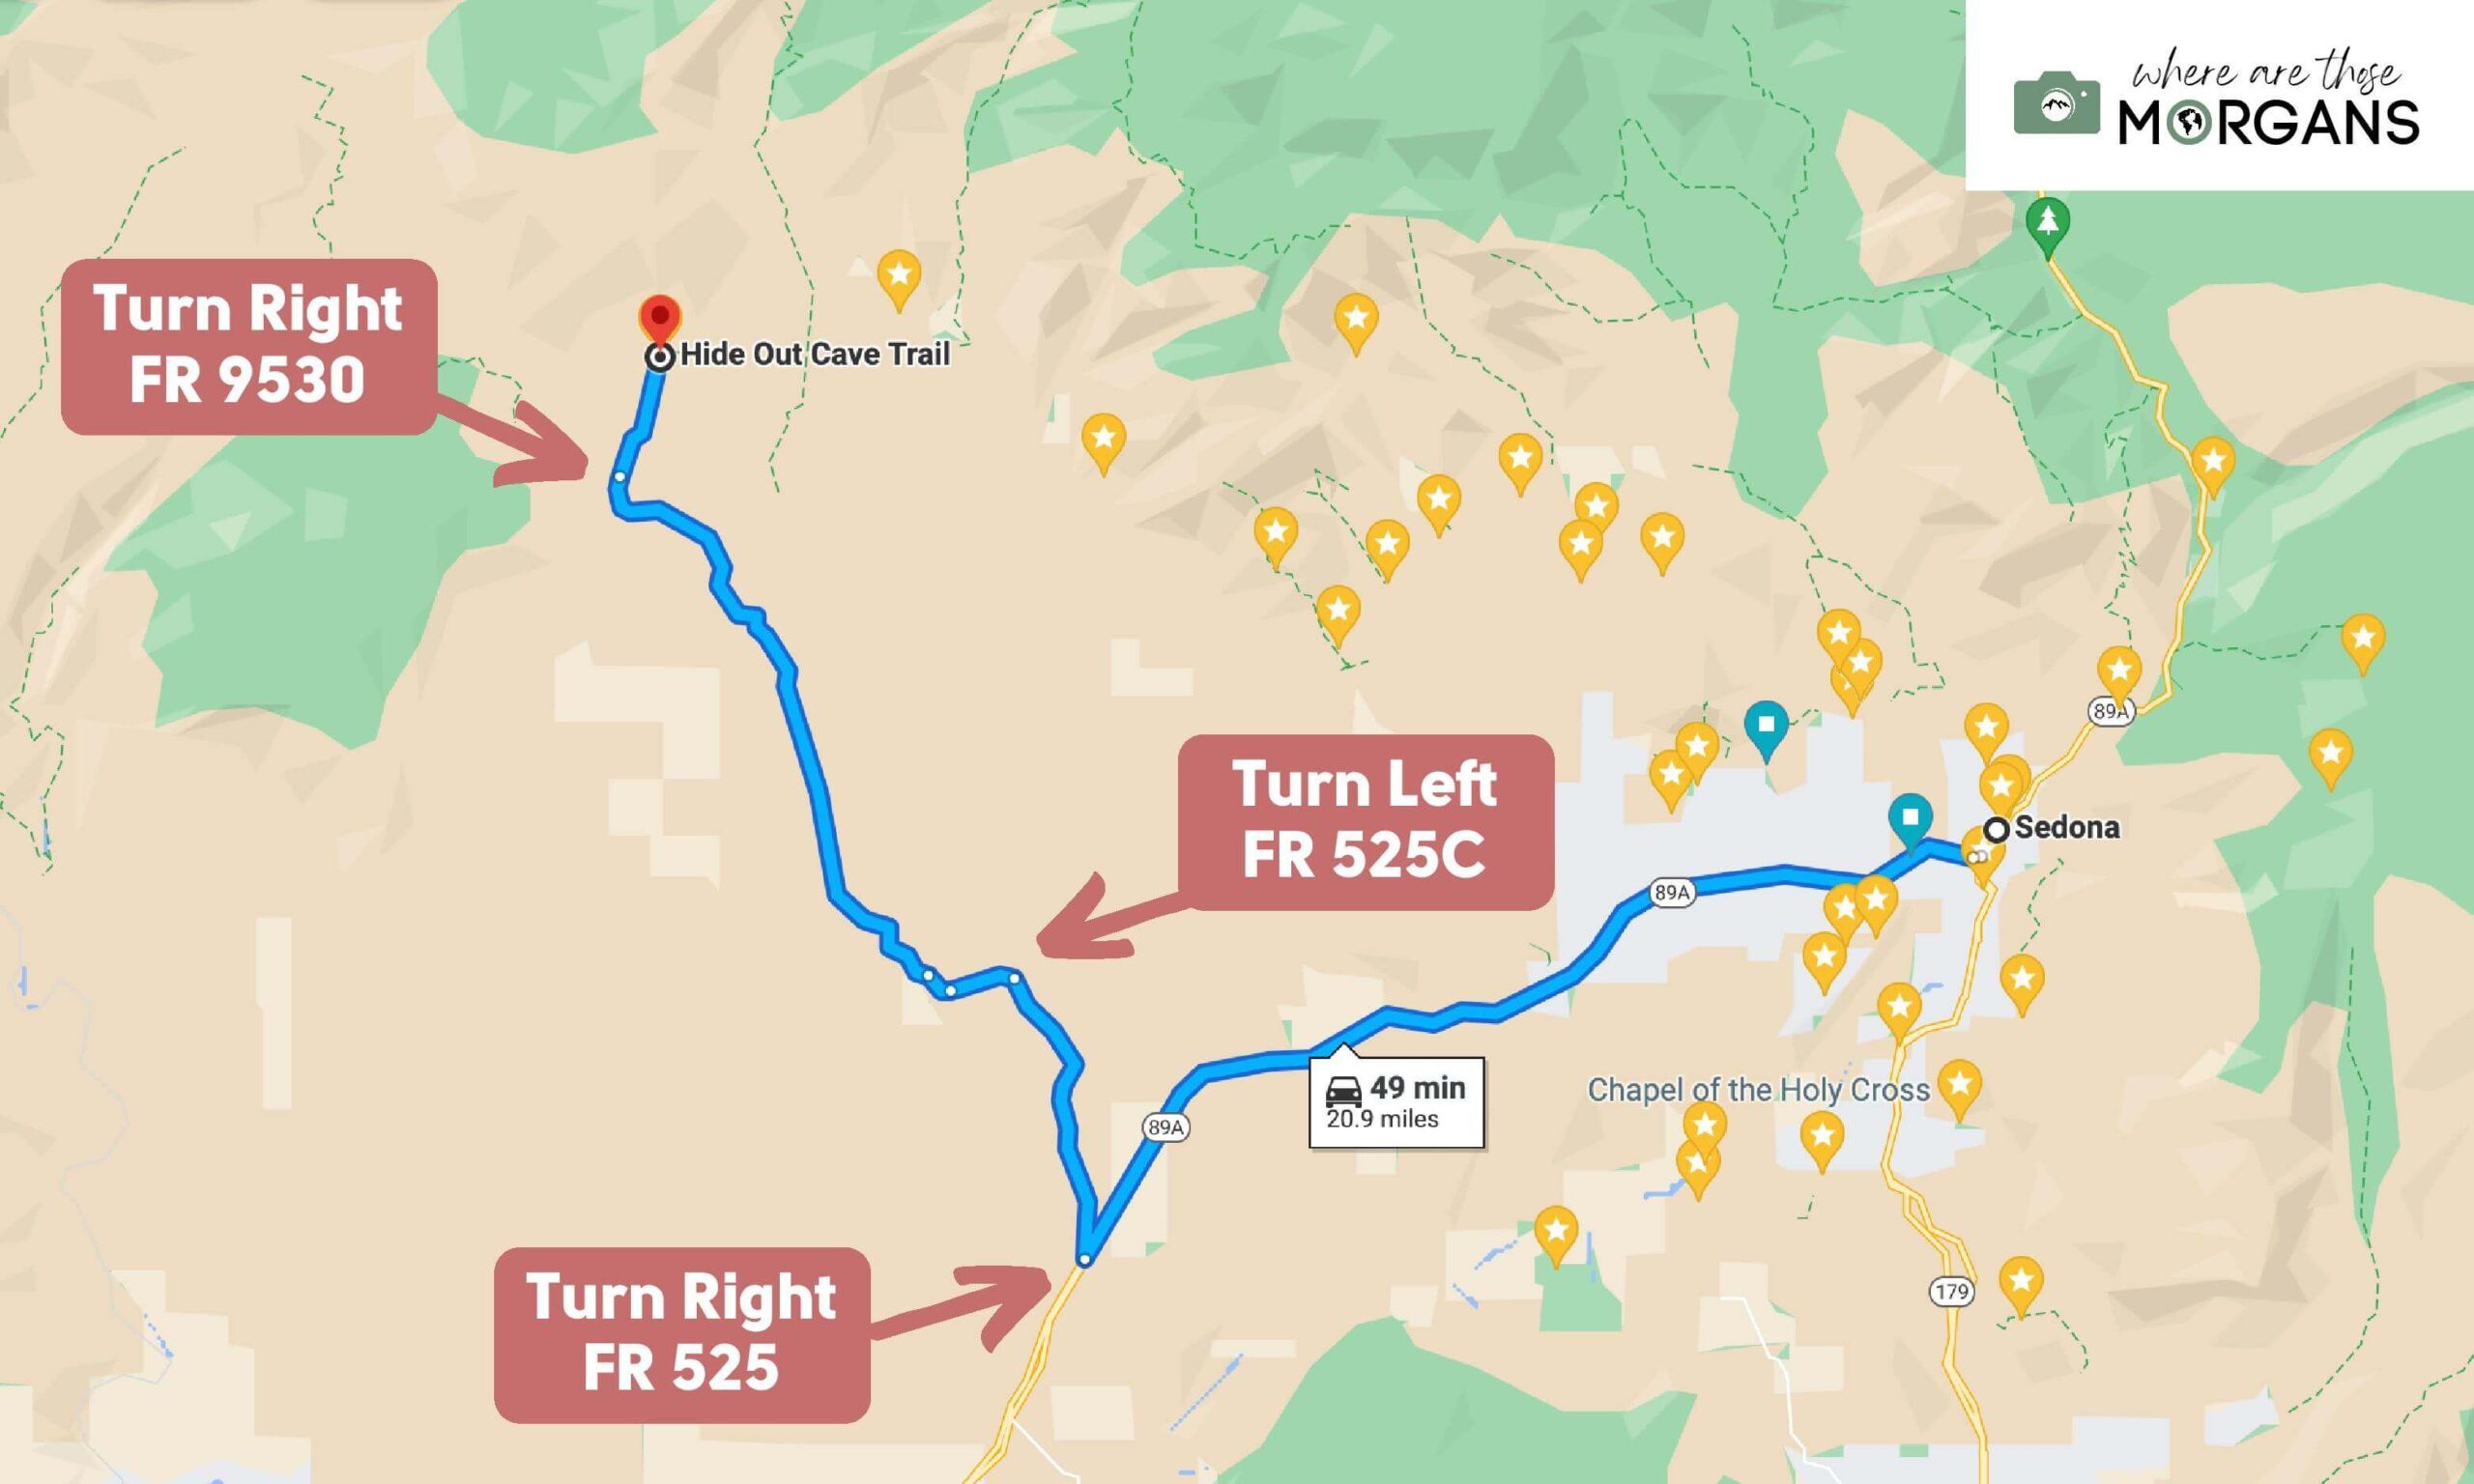 Map showing direction from Sedona to reach parking for Robbers Roost Trail to find Hideout Cave key turning points and road numbers